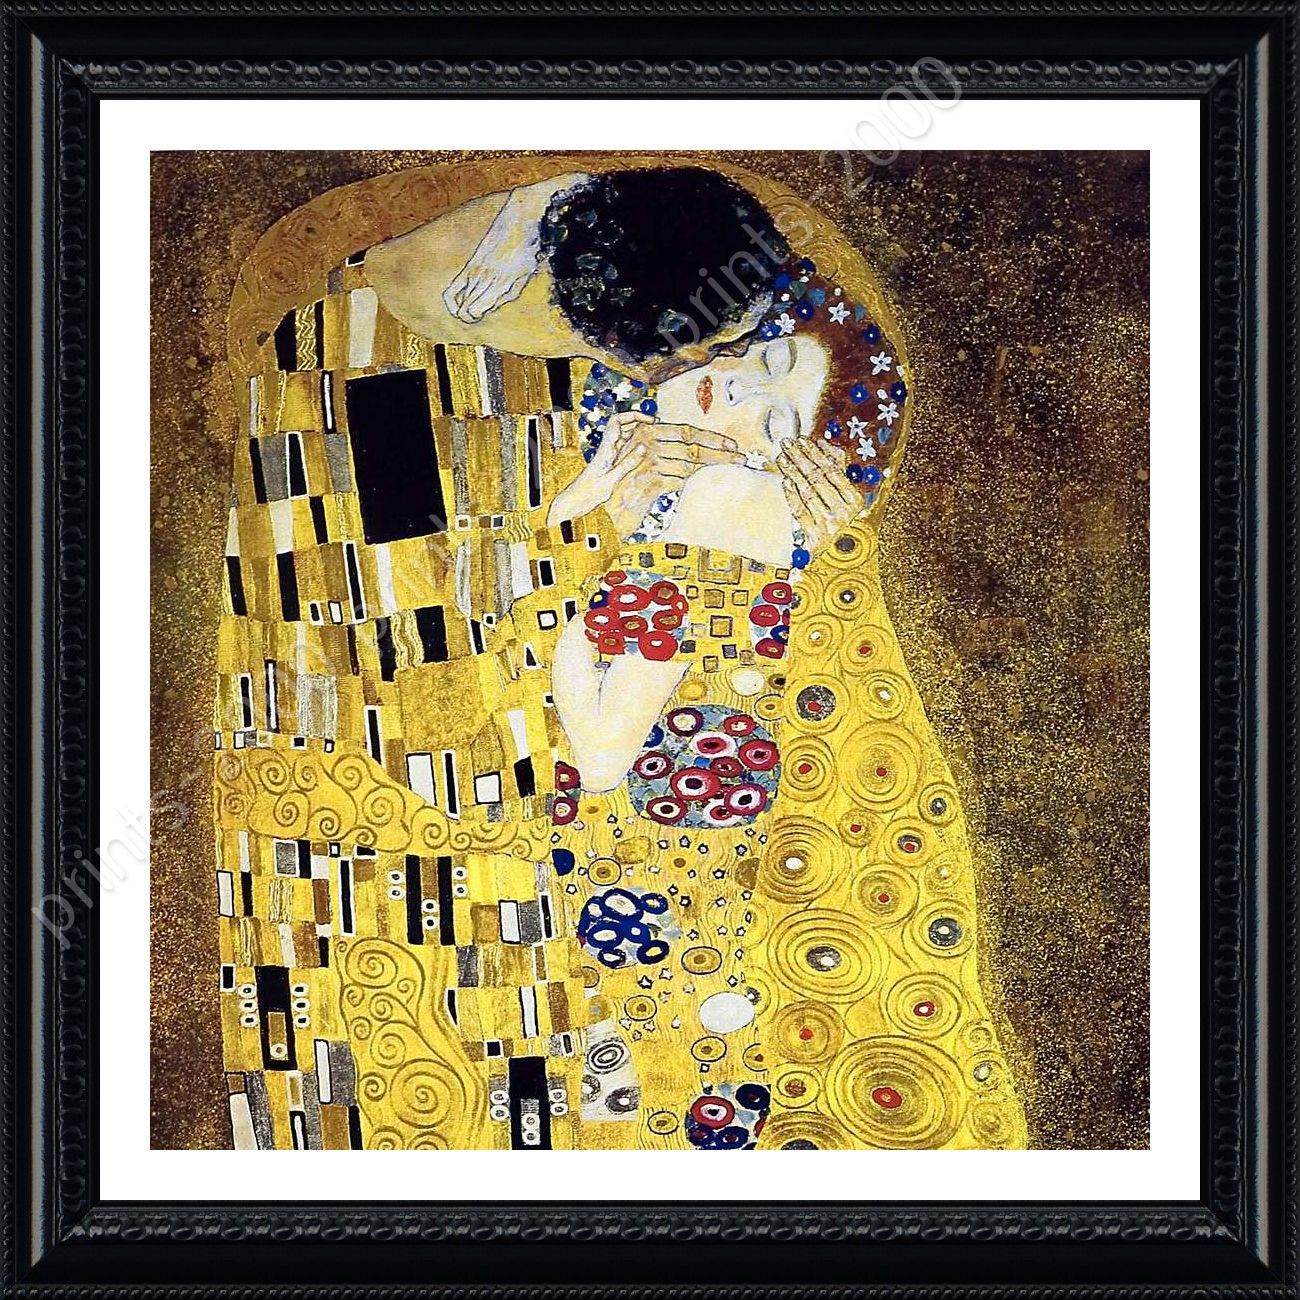 by Gustav Klimt Giclee Printed on Canvas Stretched Gallery Wrapped Ready to Hang Canvas Art Wall Decor 32x24 JAPO ART The Kiss